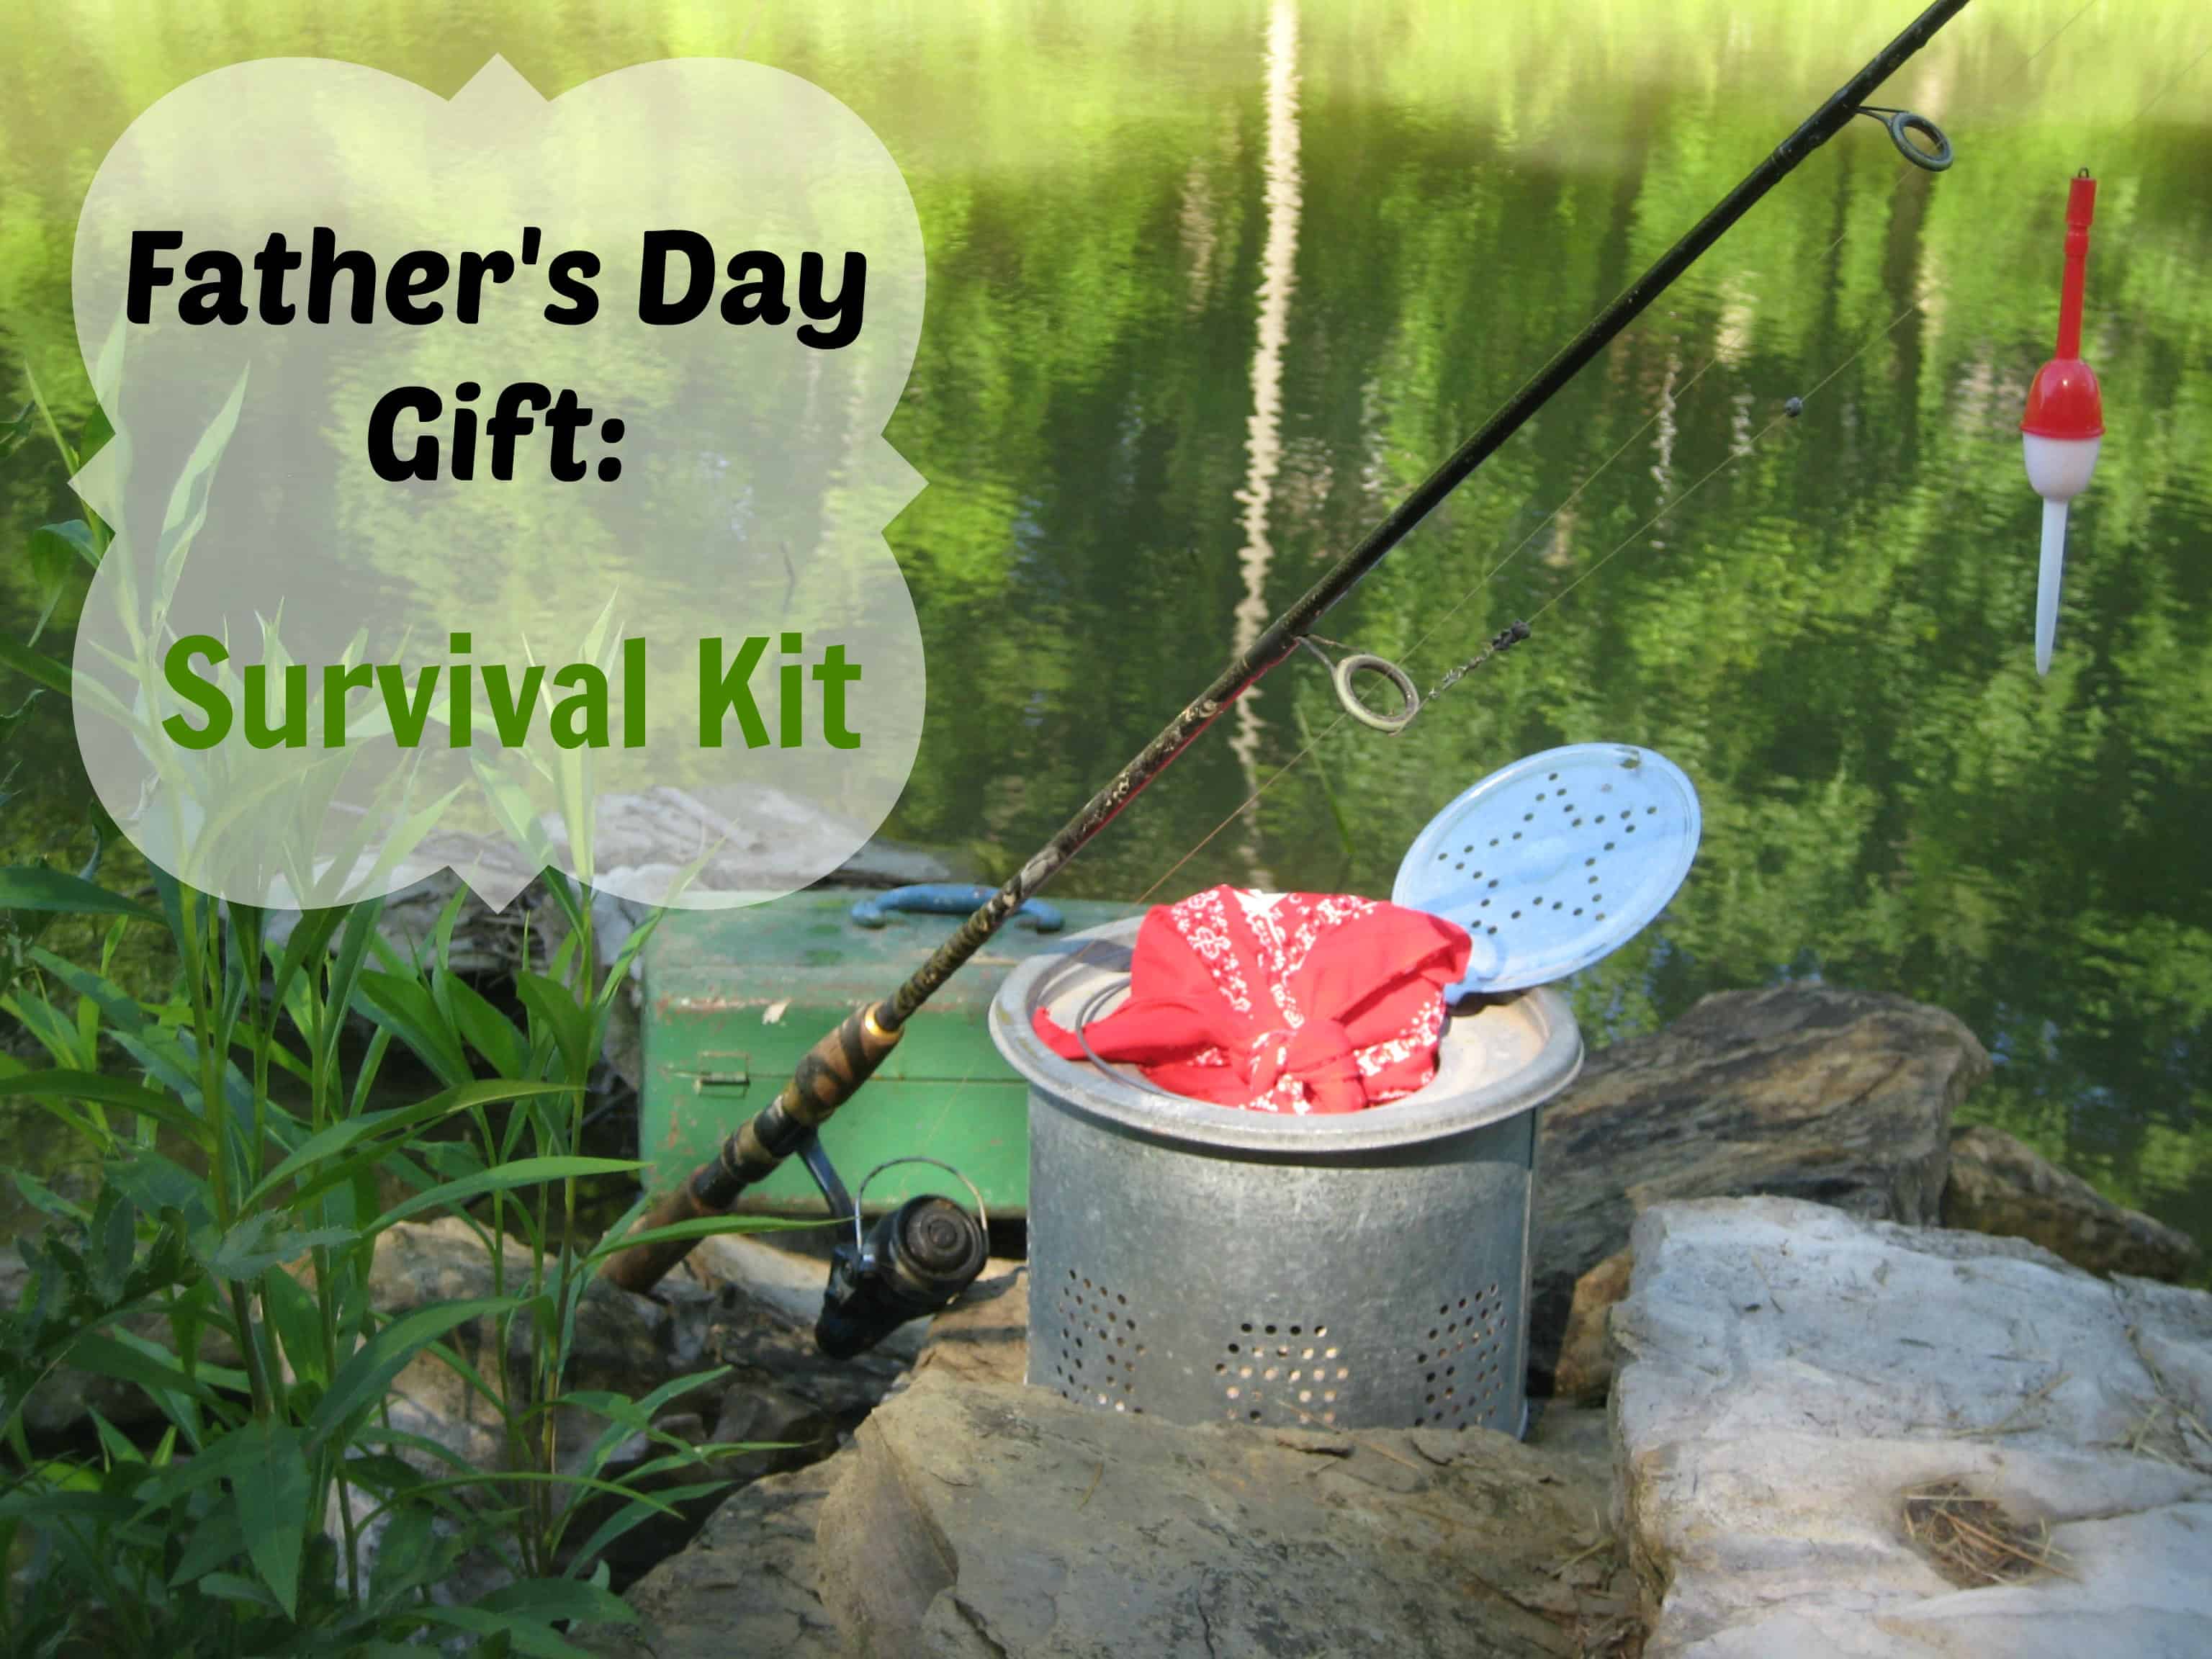 Survival kit for Father's Day! – Backyard Brilliant